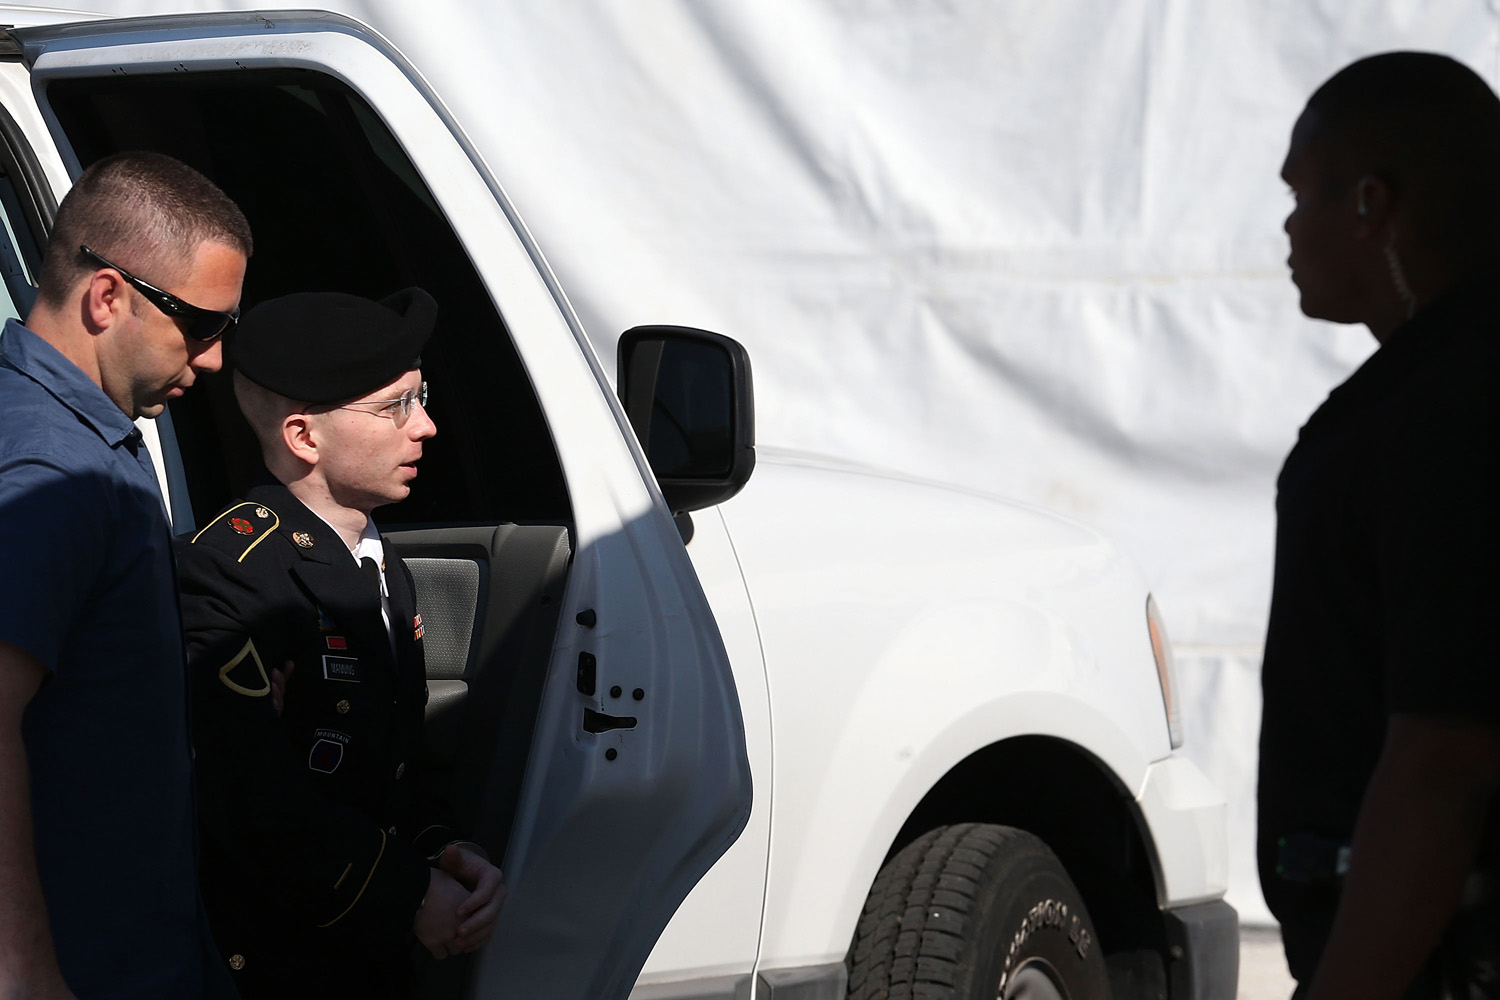 July 30, 2013. U.S. Army Private First Class Bradley Manning (C) is escorted by military police as arrives to hear the verdict in his military trial at Fort George G. Meade, Maryland.